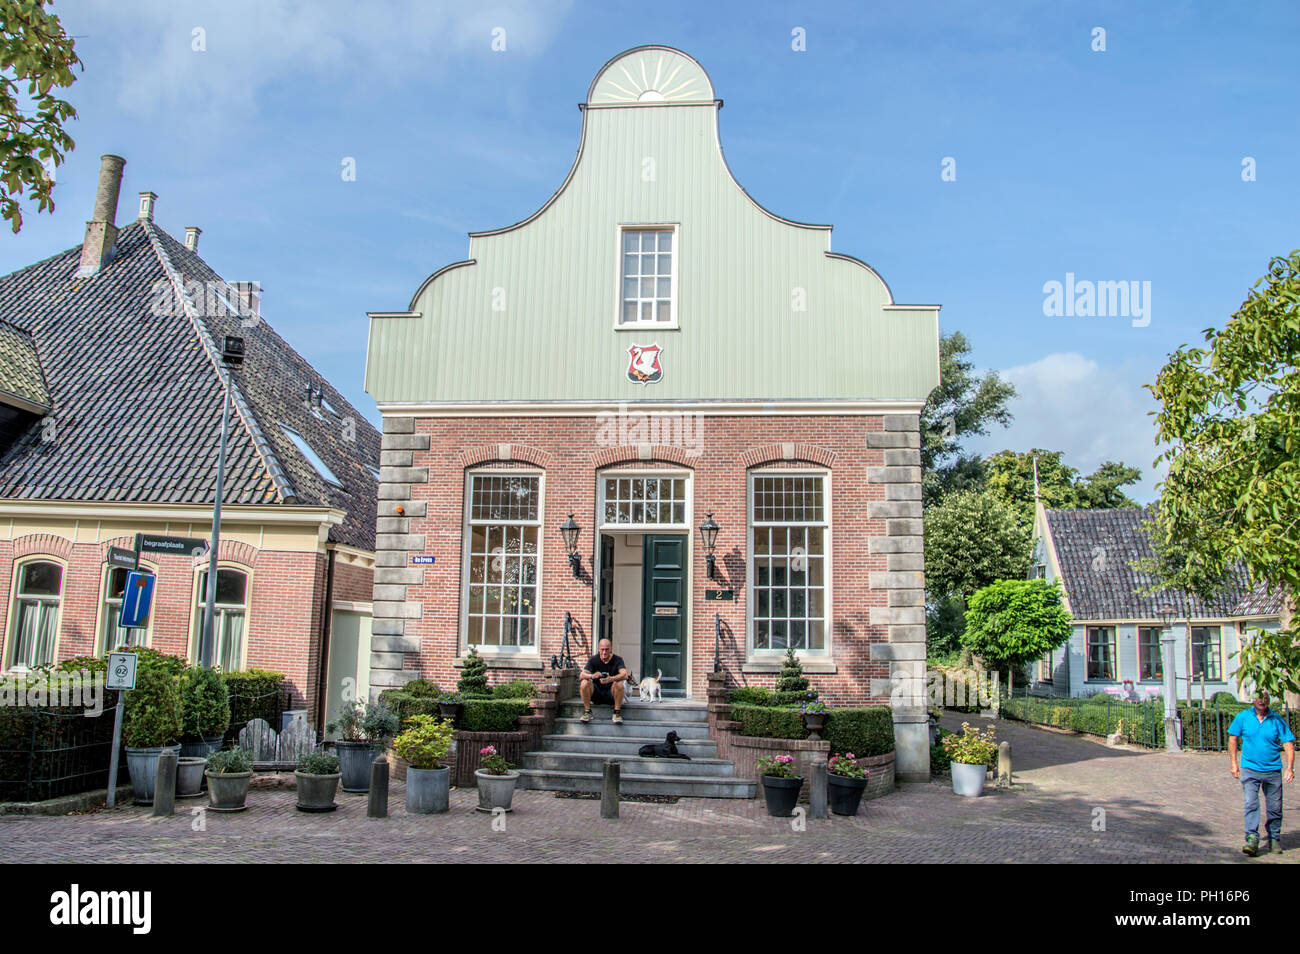 Broek in waterland hi-res stock photography and images - Alamy